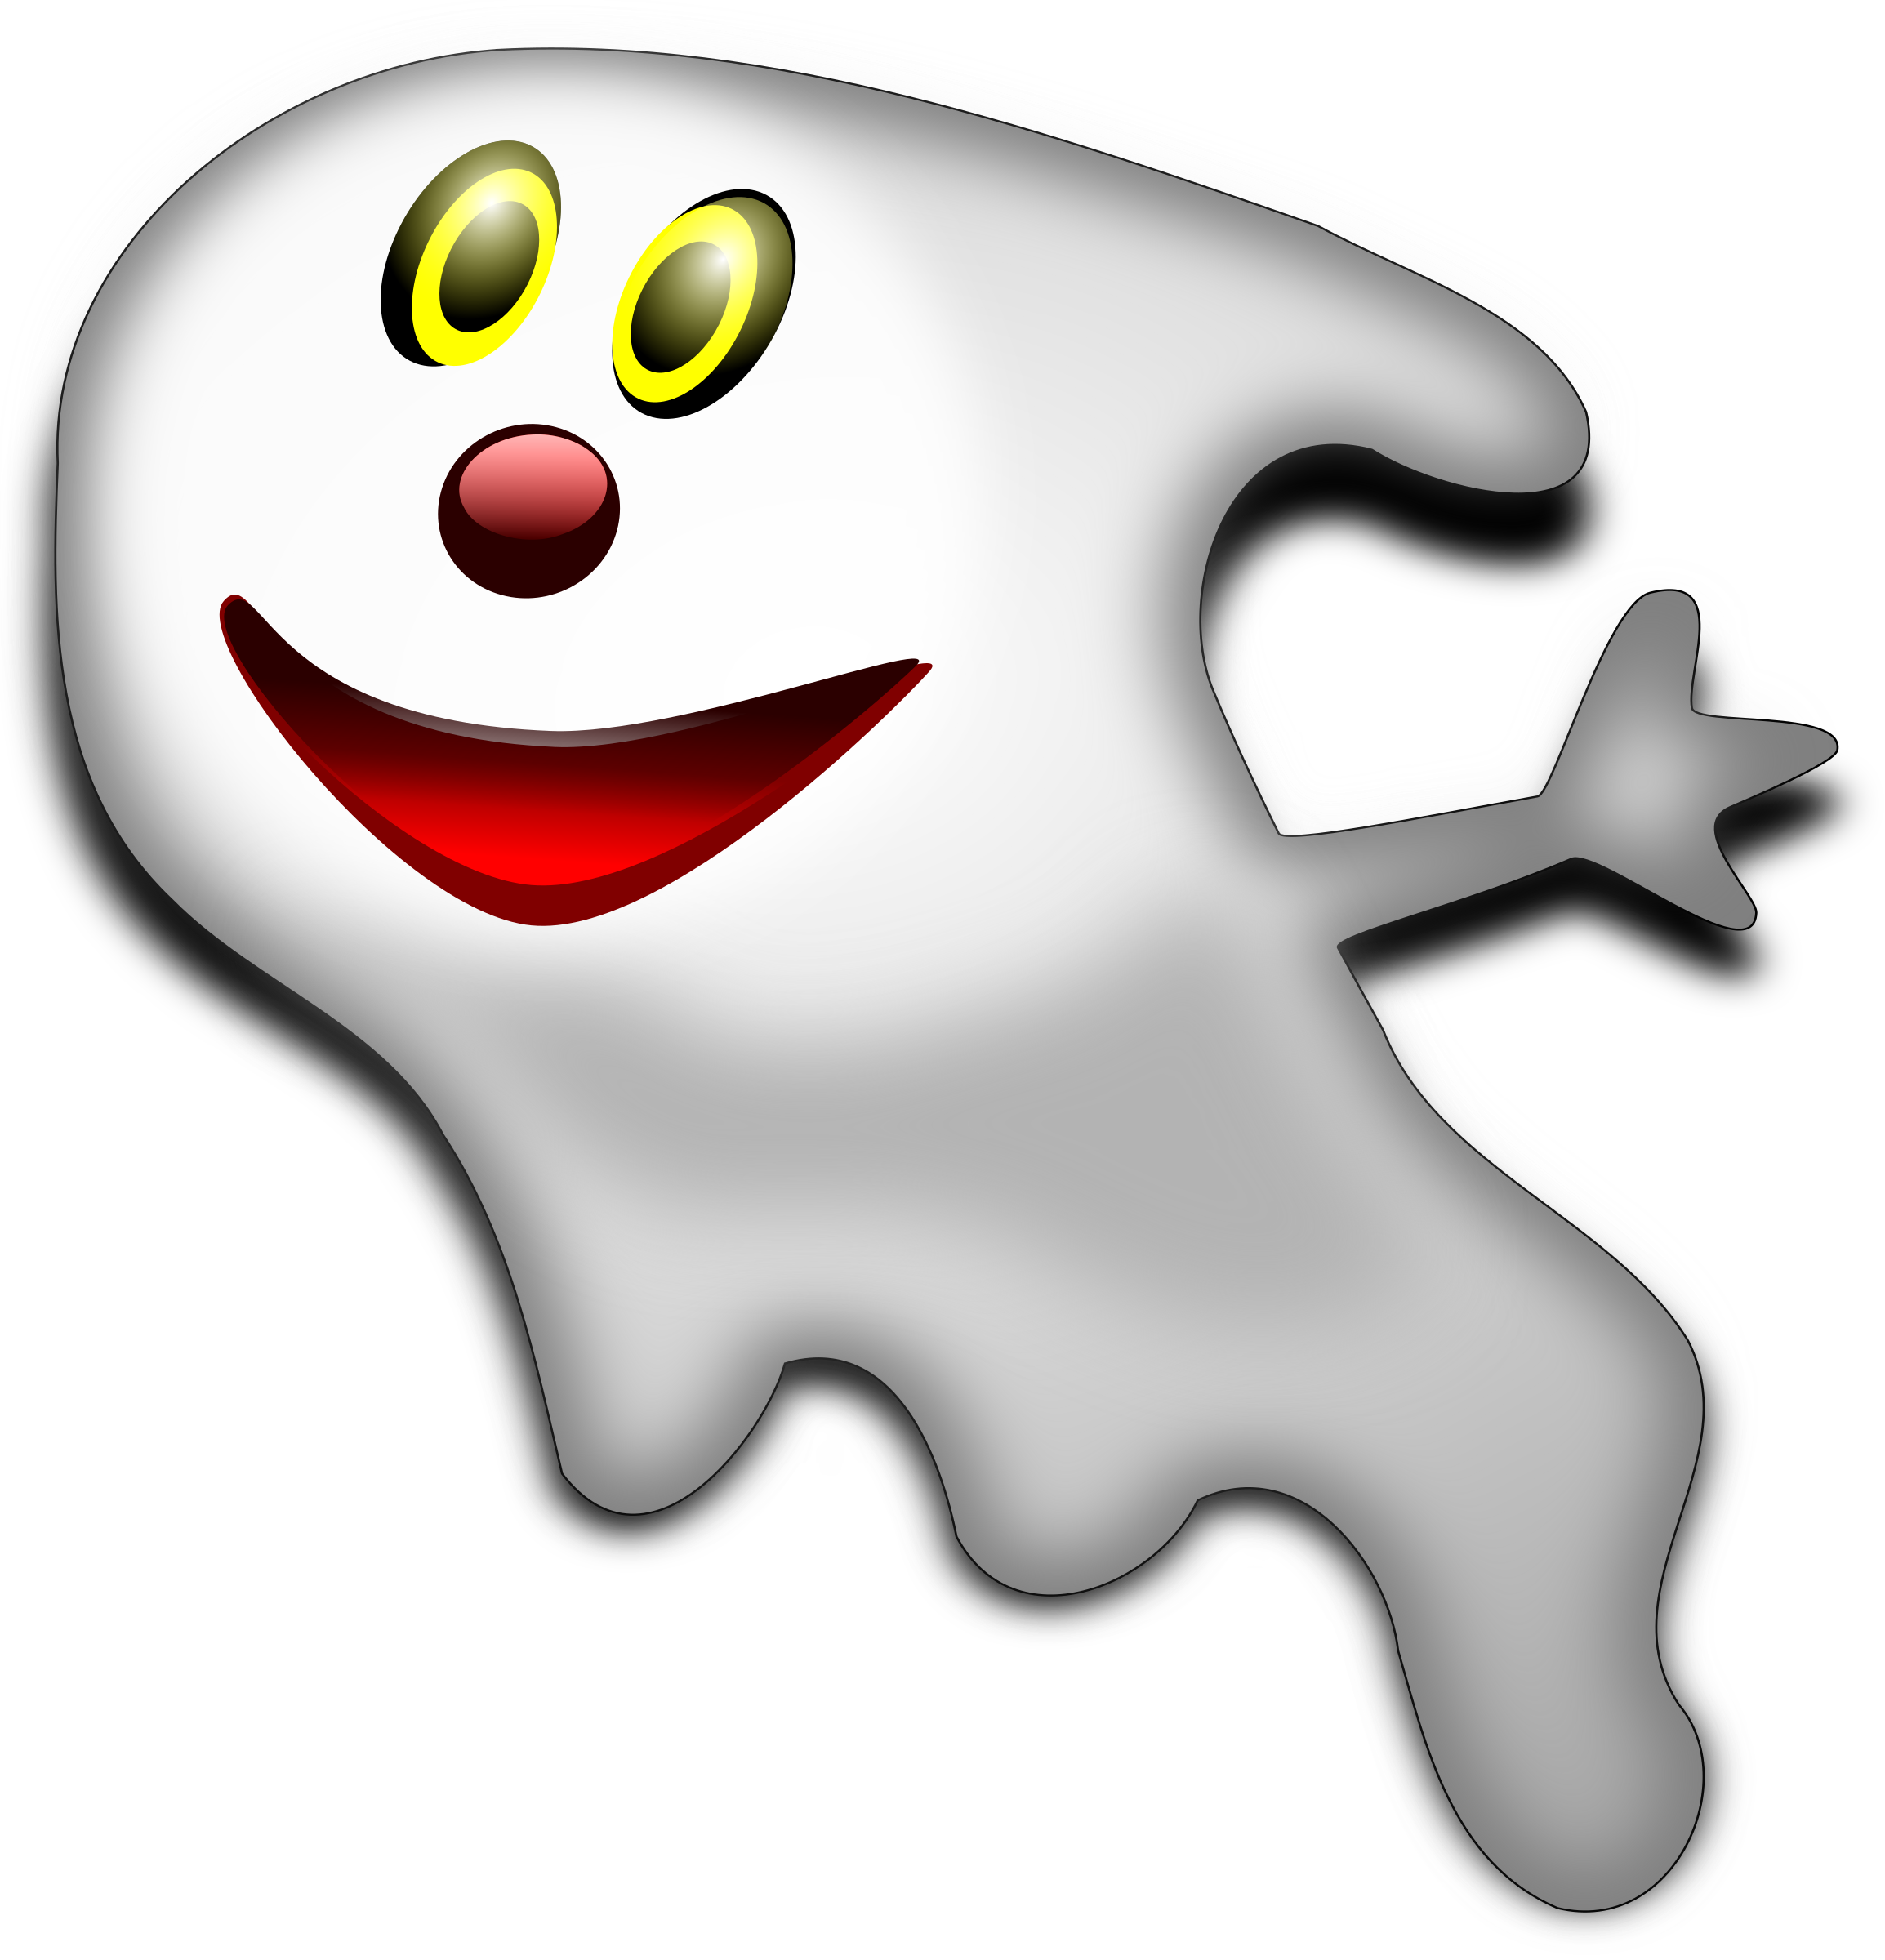 Ghost Halloween Creepy Face Scary Spooky Smiley - Halloween Guessing Game (2308x2400)